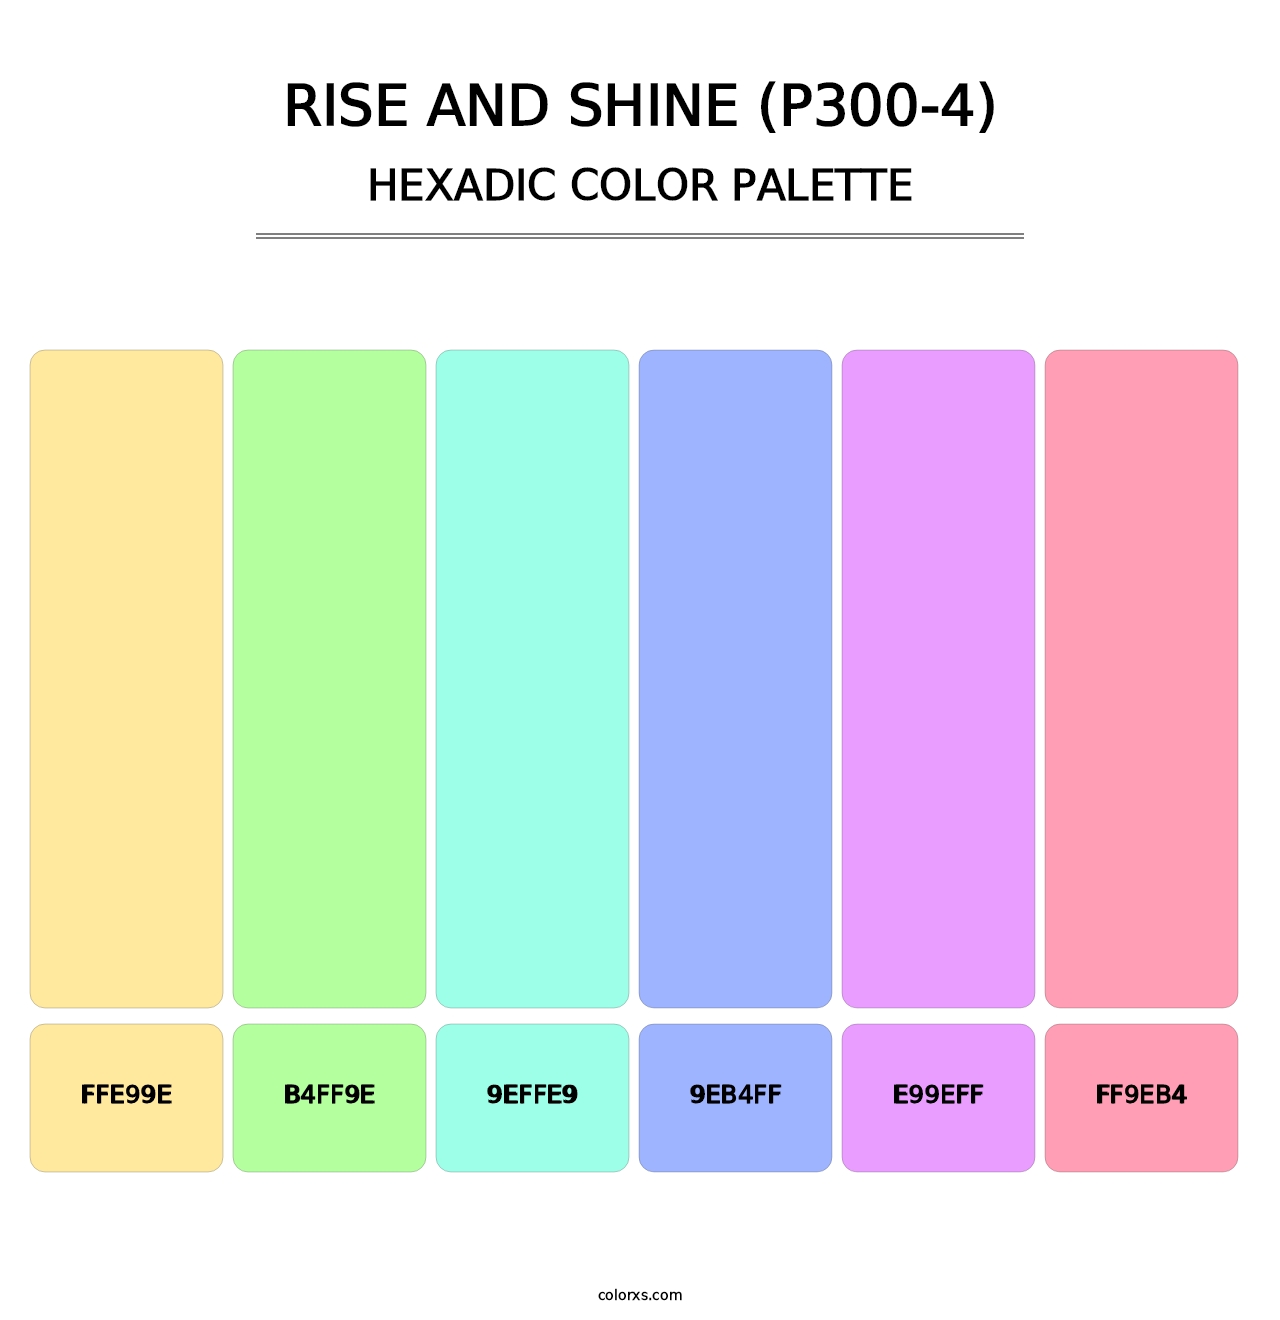 Rise And Shine (P300-4) - Hexadic Color Palette